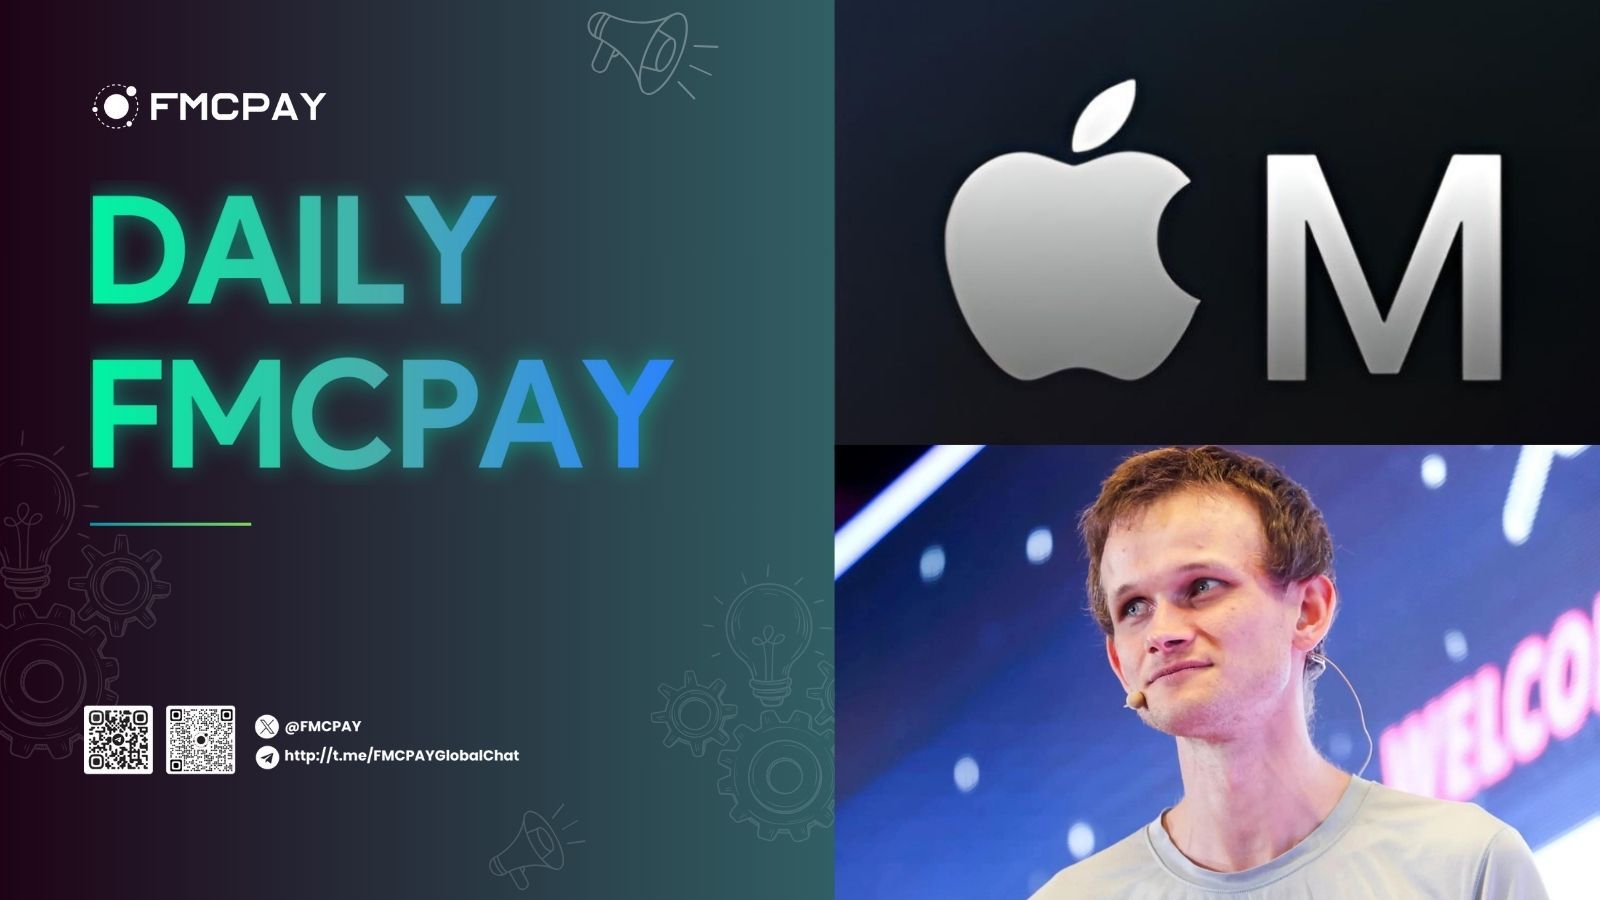 fmcpay unpatchable flaw in apple m series chip may allow access private keys